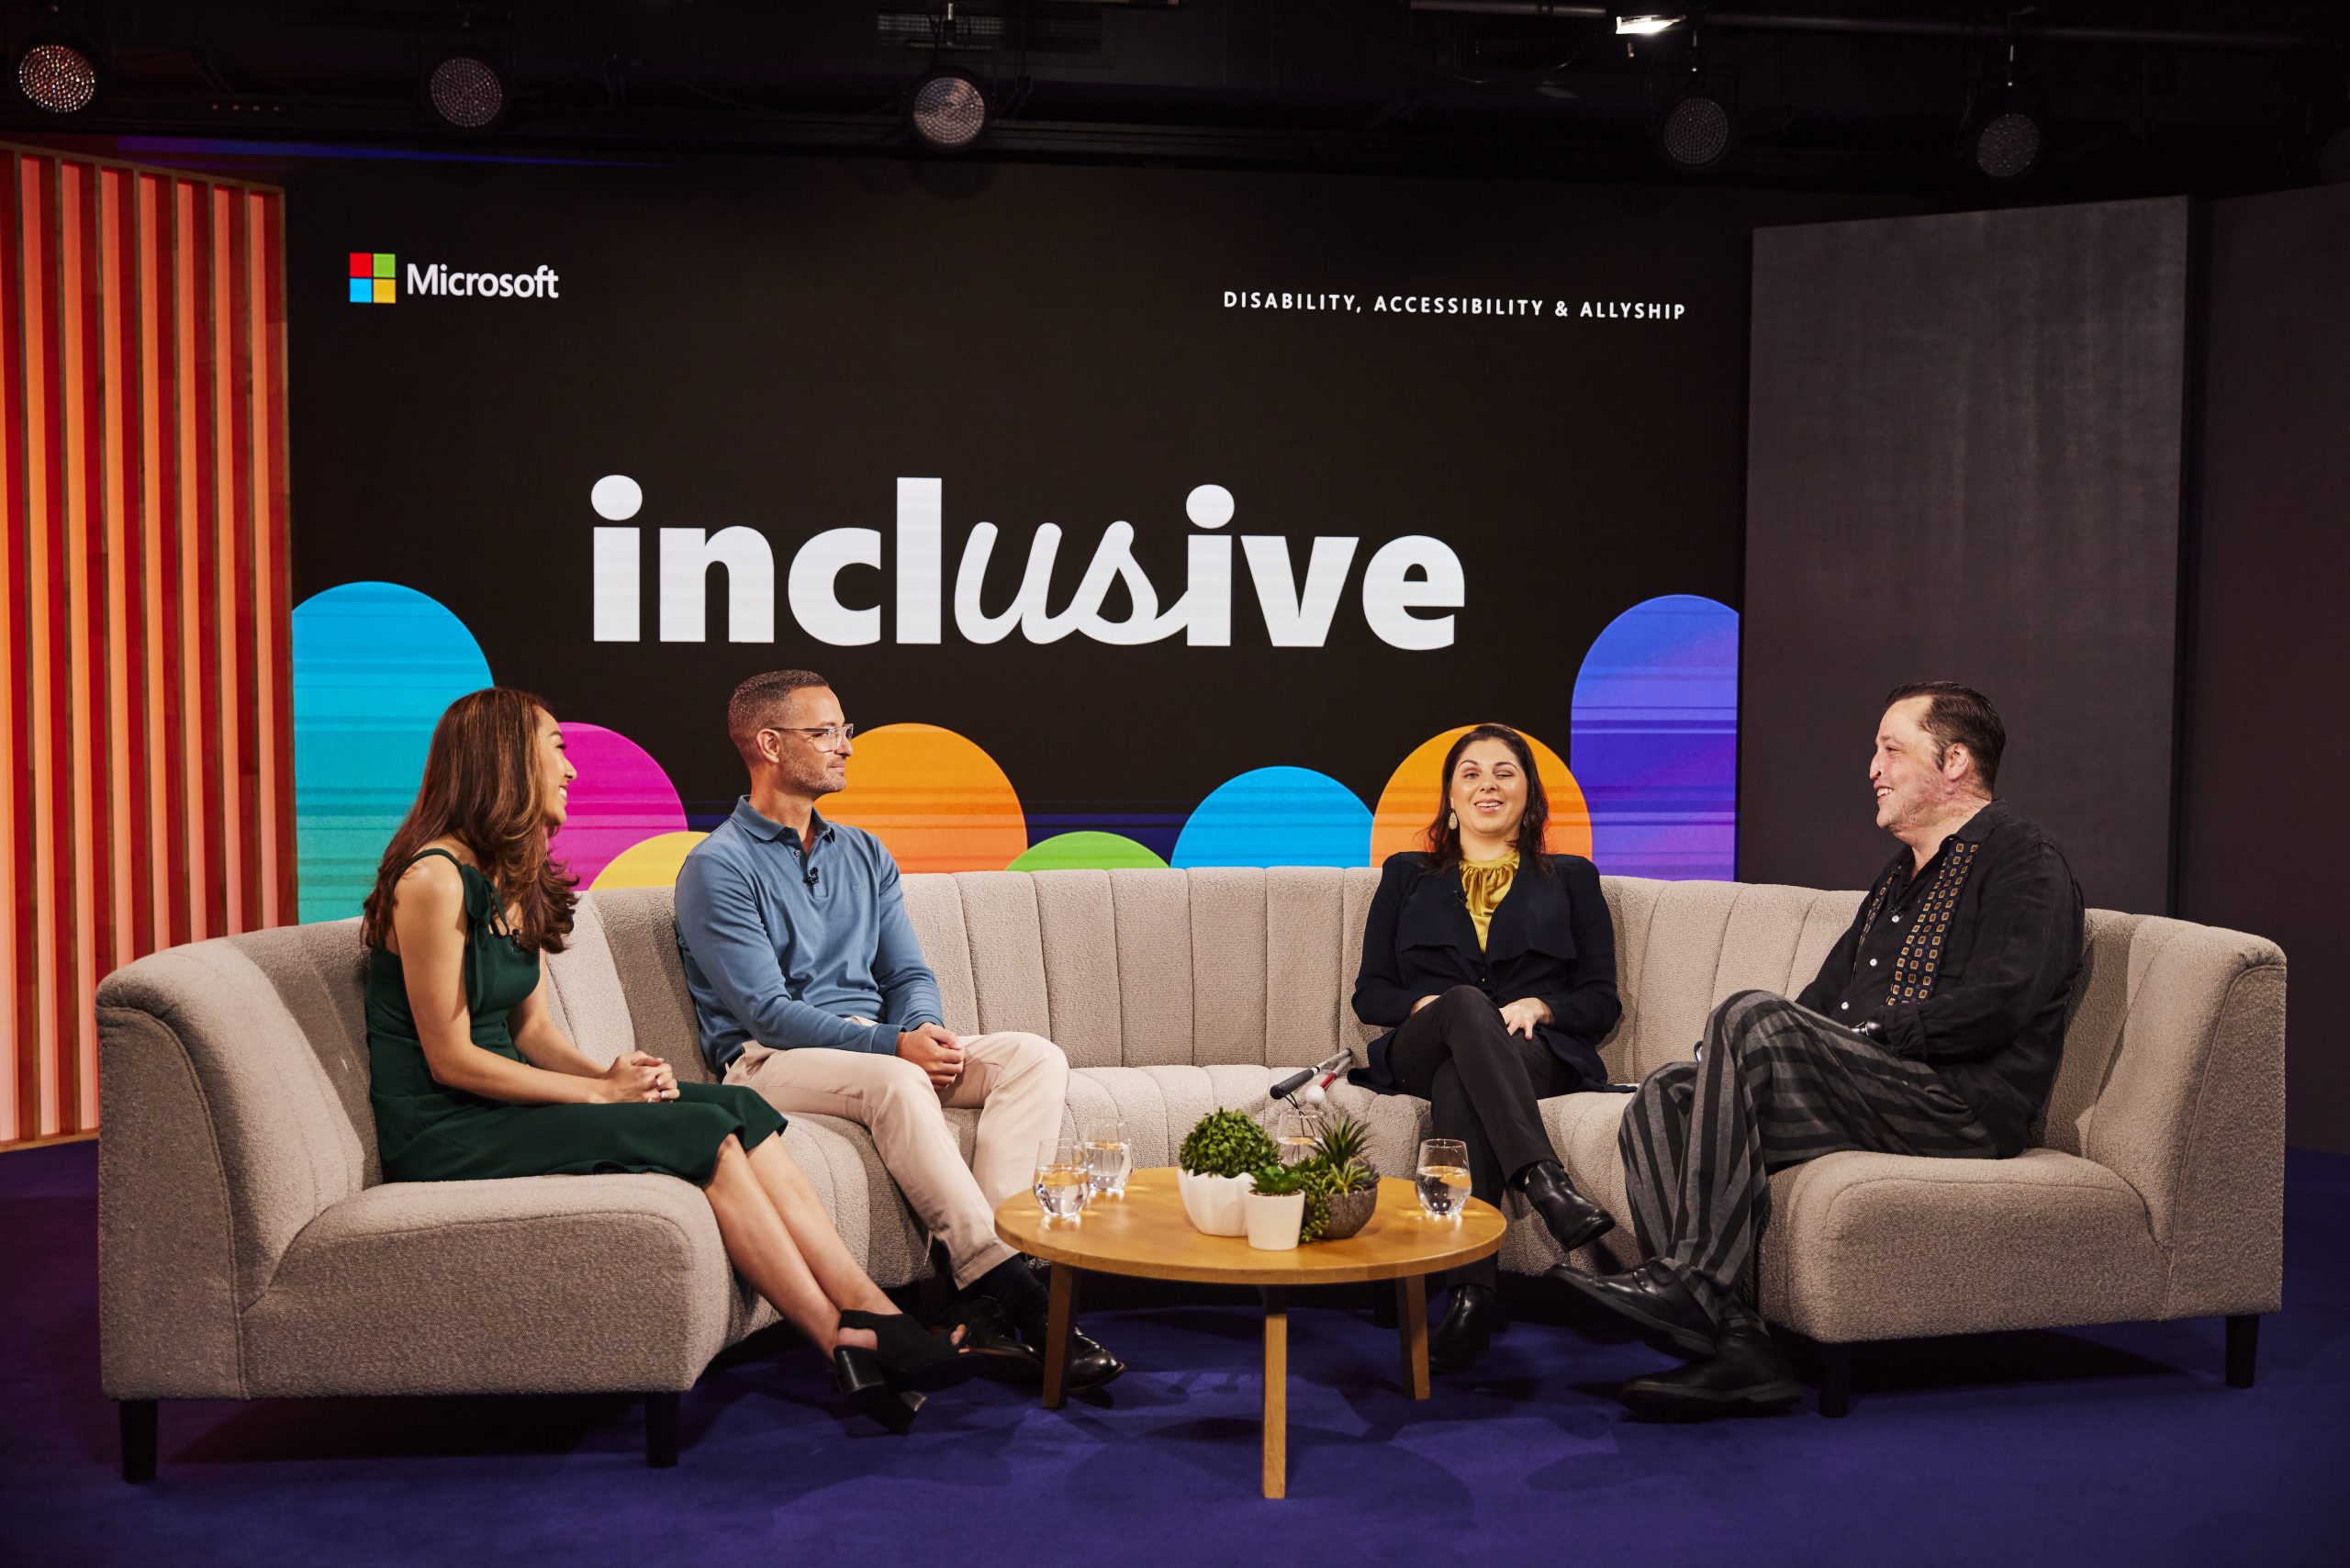 Group of four adults sitting on a biege couch infront of the Microsoft Inclusive event sign